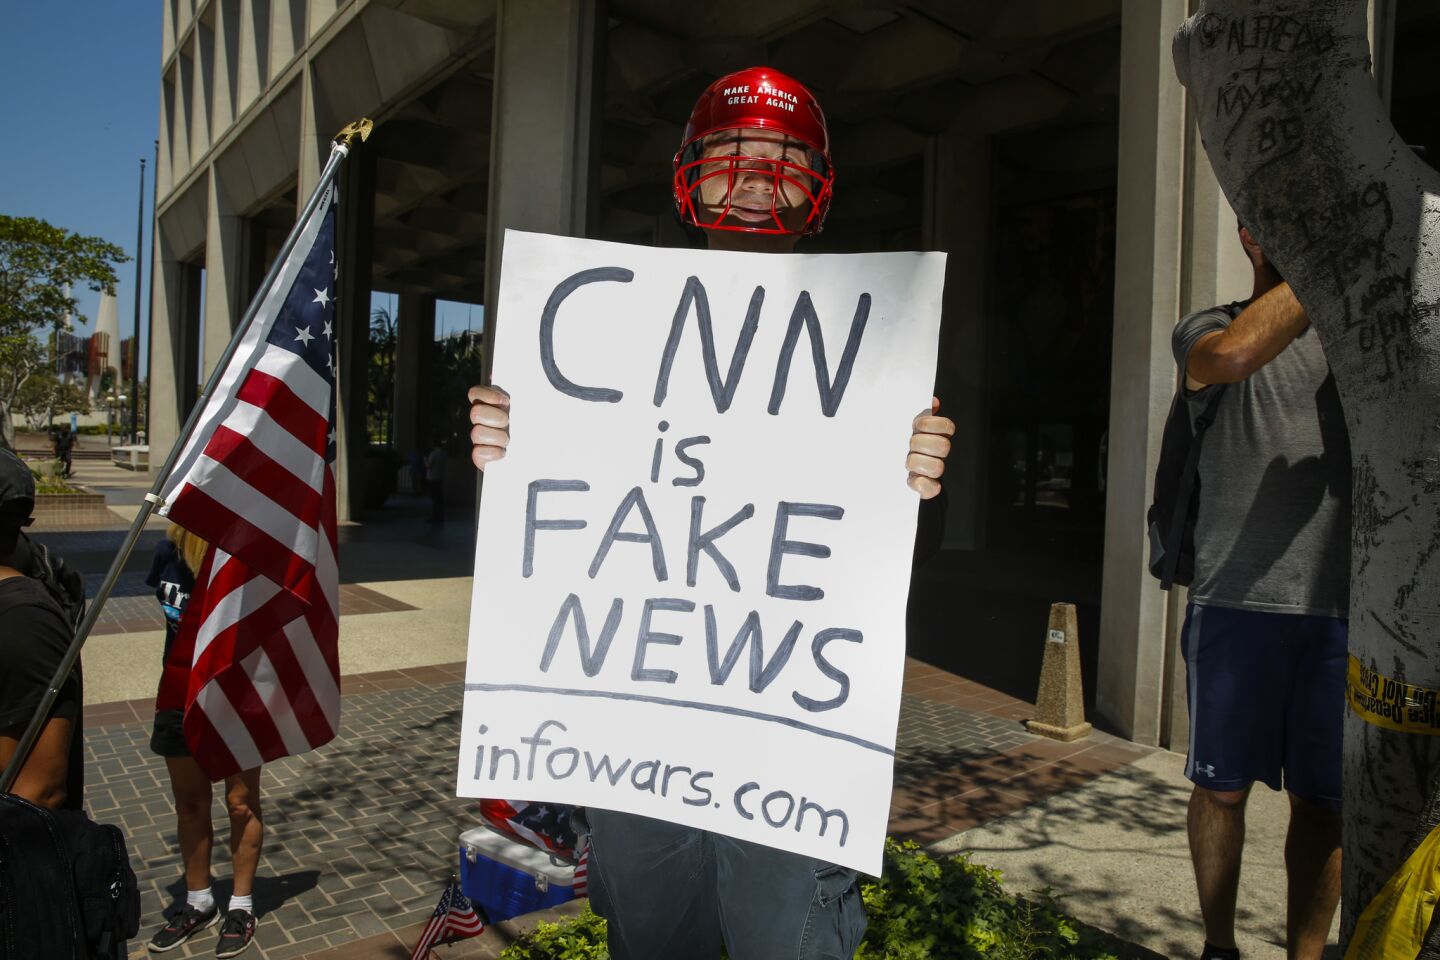 A man holding a sign that says, "CNN is Fake News" and "infowars.com" positioned himself into photos while members of the news media covered the protest march in downtown L.A.